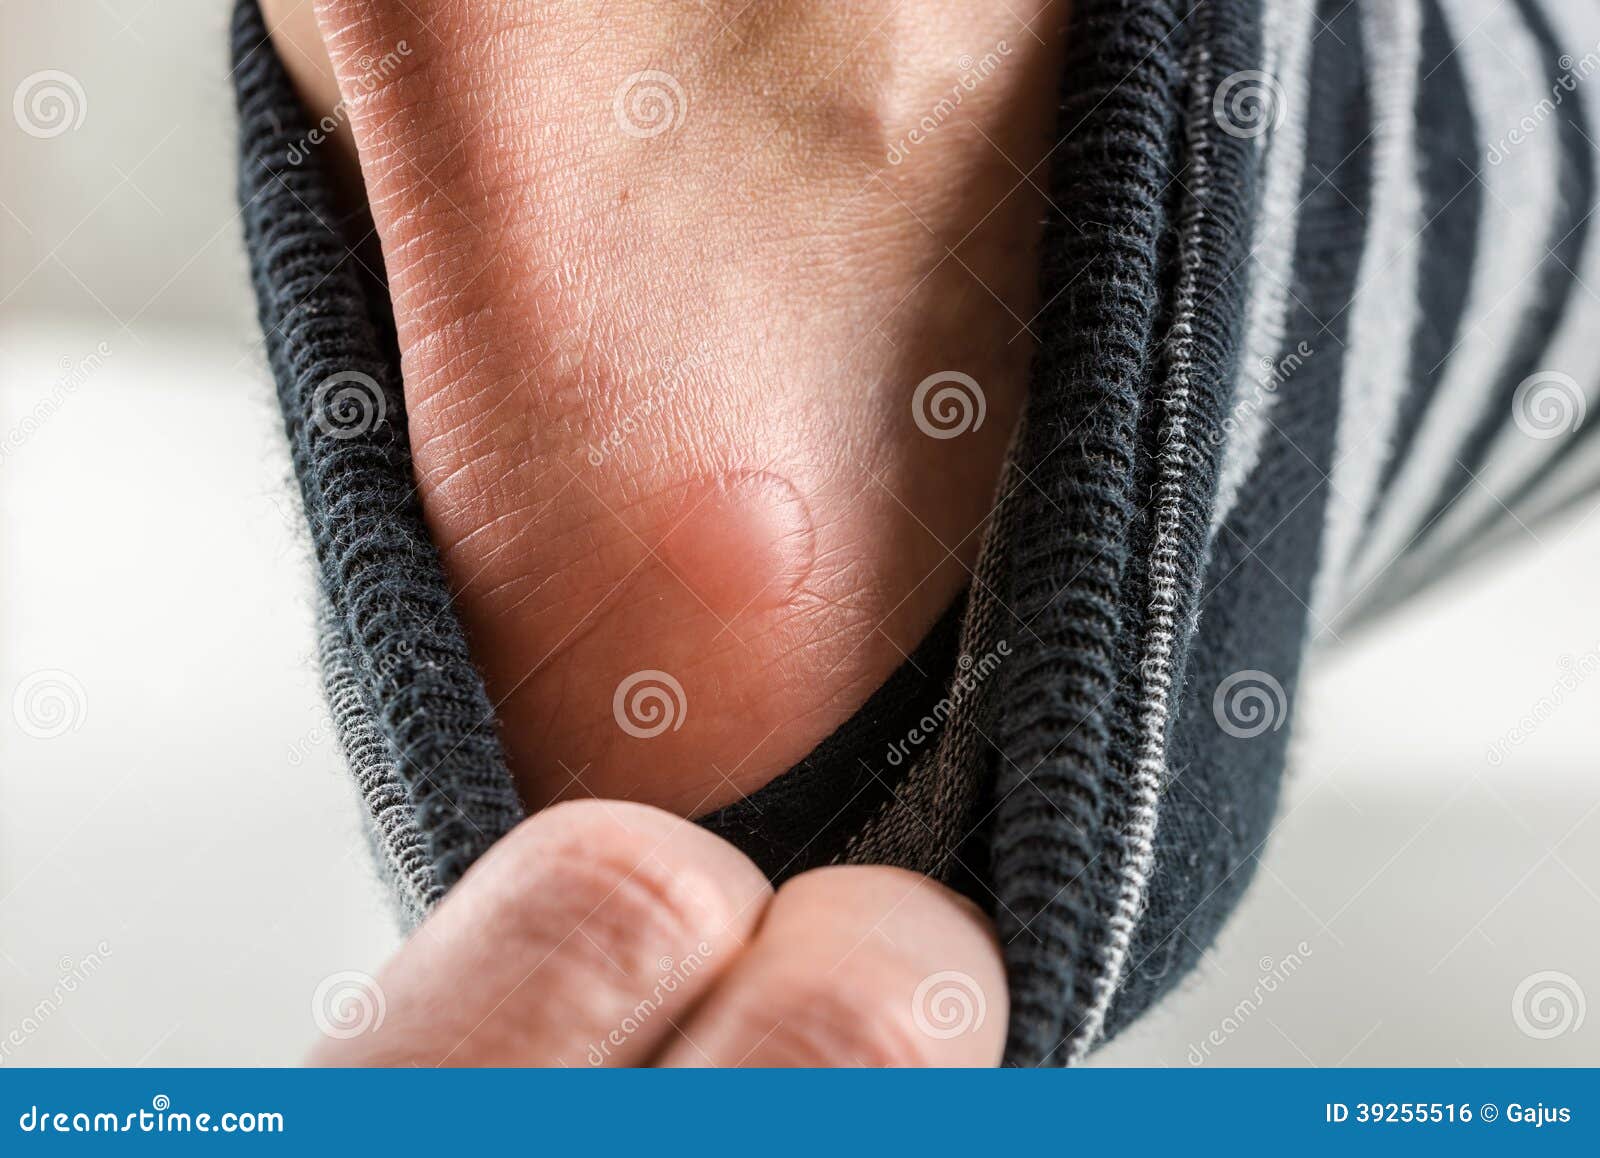 man with a blister on his heel